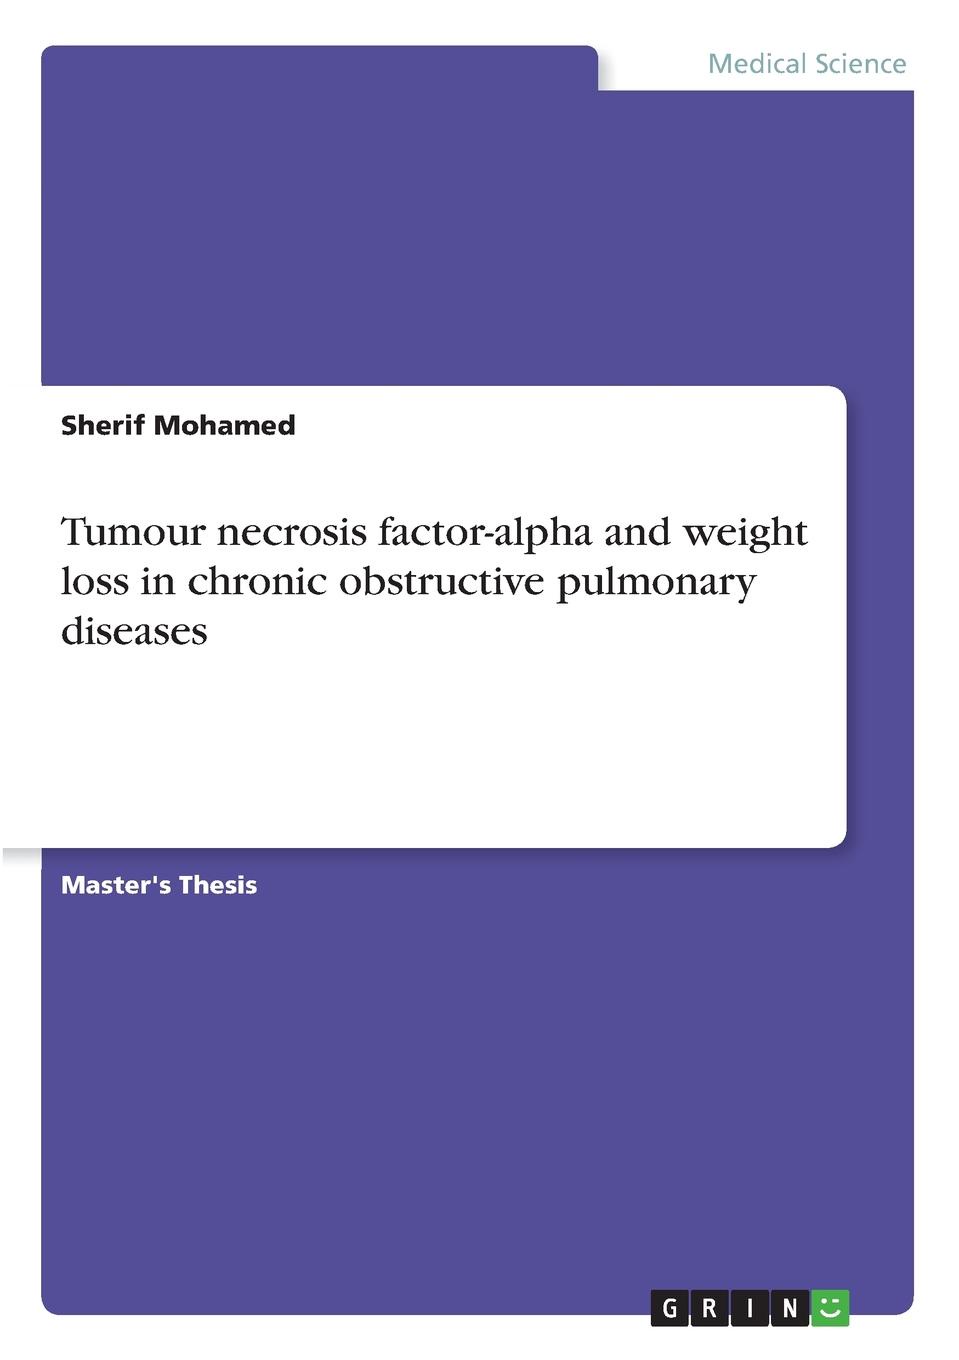 Tumour necrosis factor-alpha and weight loss in chronic obstructive pulmonary diseases